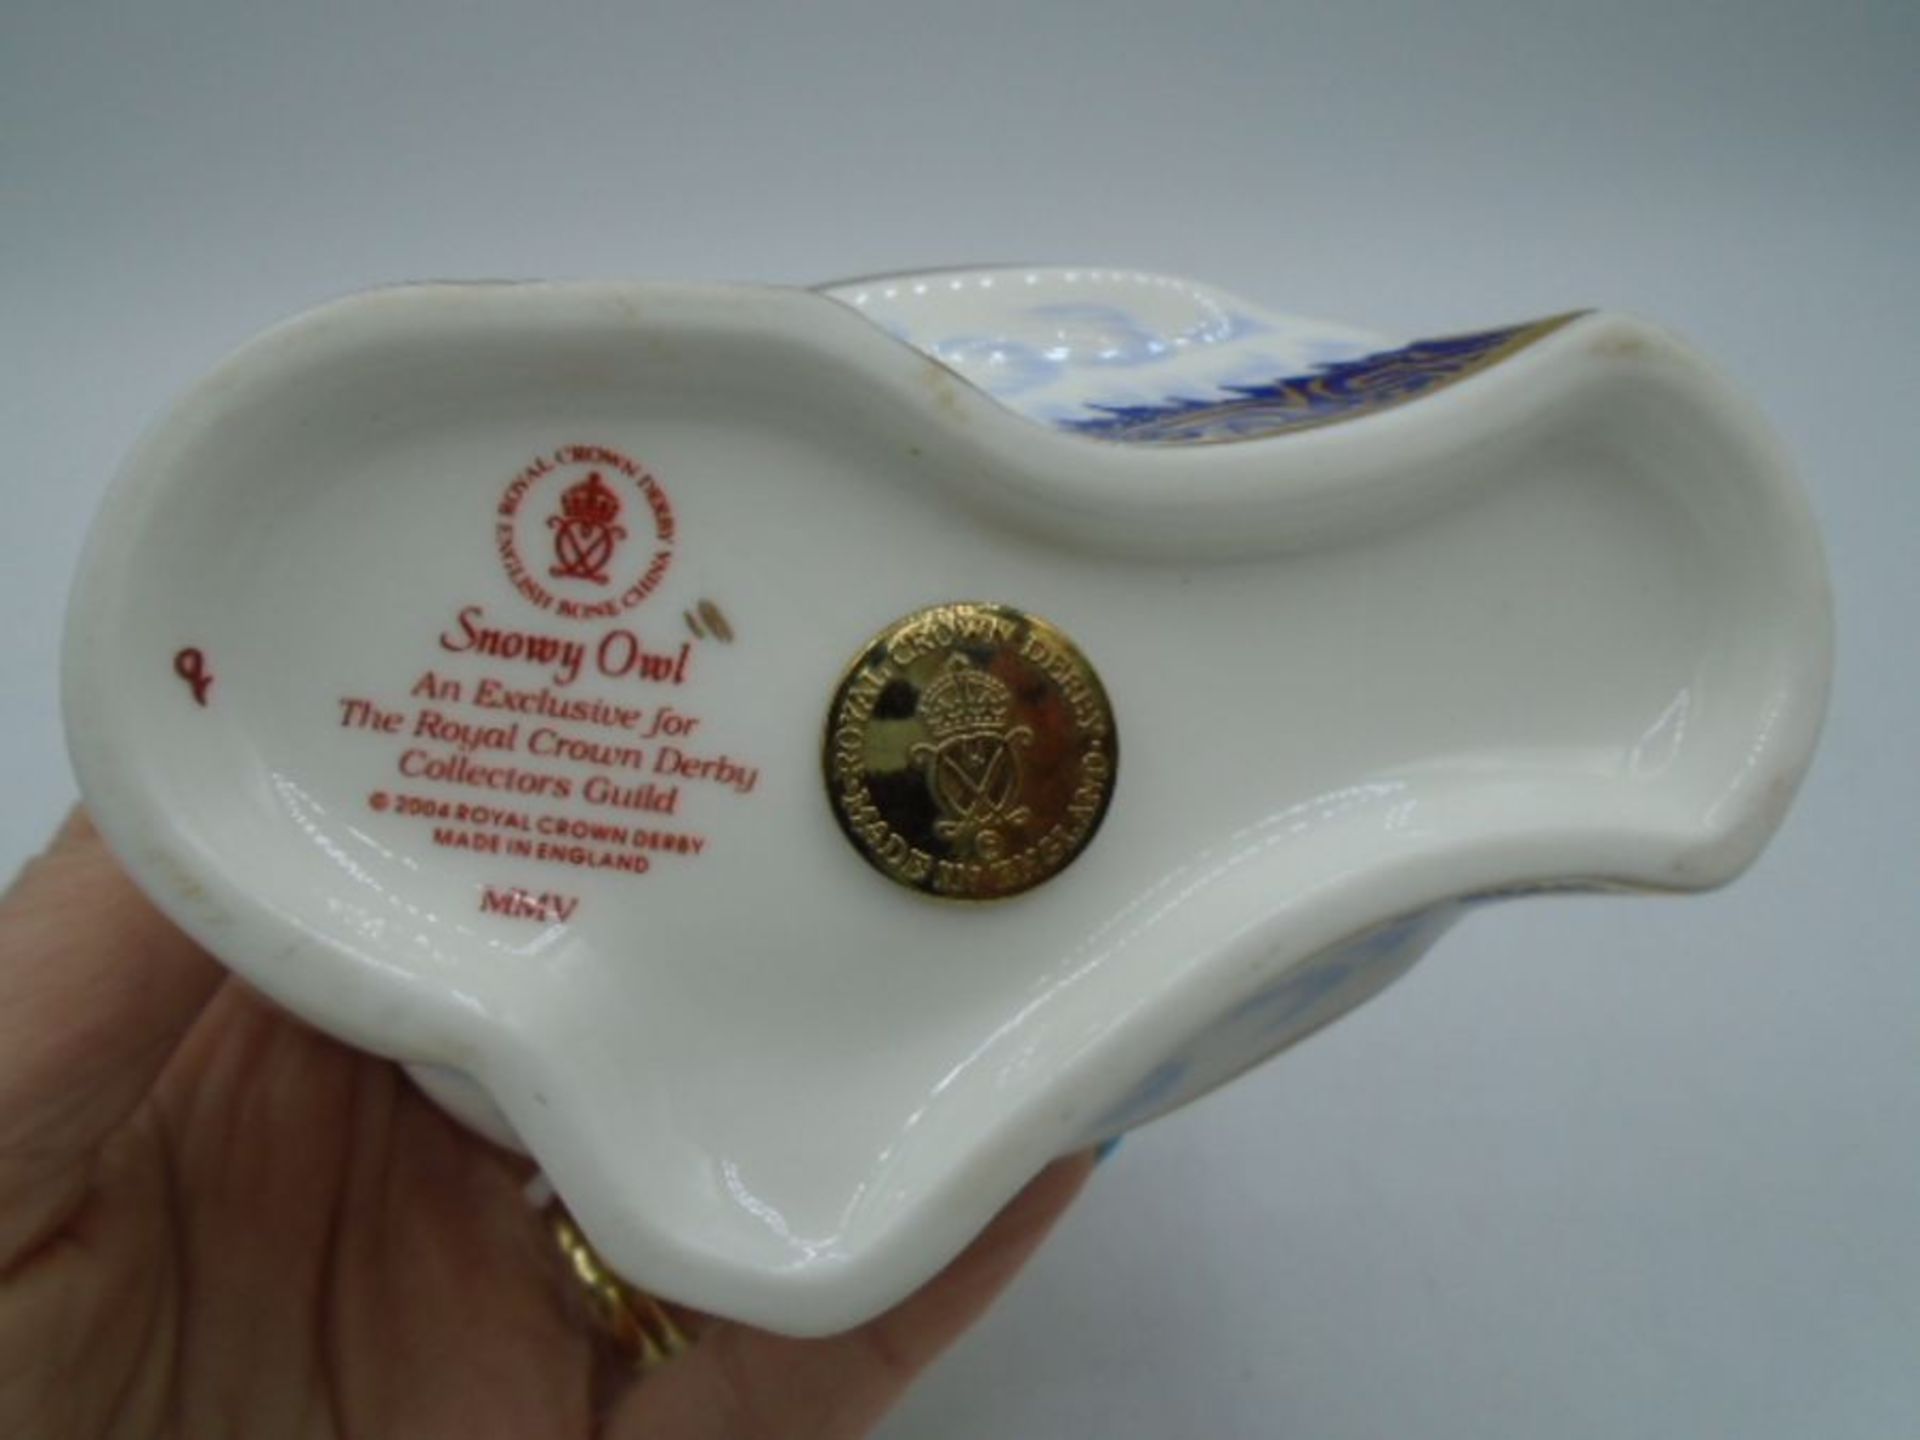 Royal Crown Derby Snowy Owl Collectors Guild Paperweight with gold stopper, 10cm tall - Image 5 of 5